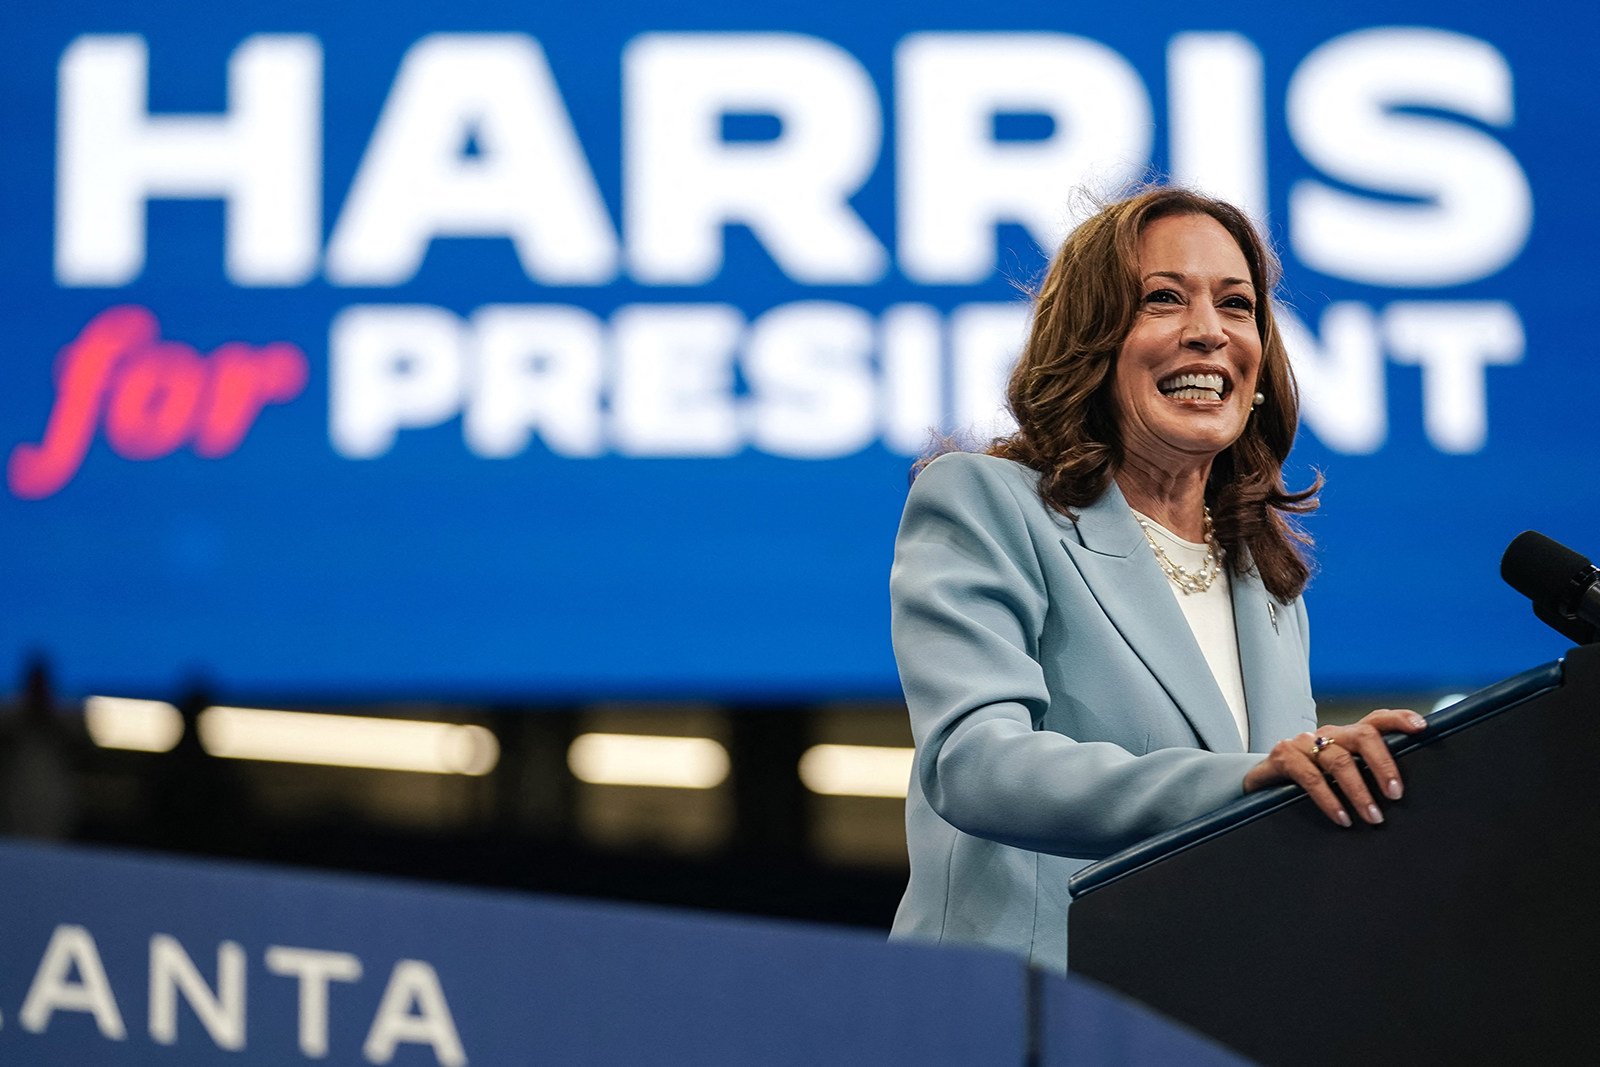 US Vice-President Kamala Harris speaks at a campaign rally in Atlanta, Georgia, on Tuesday. Photo: AFP via Getty Images/TNS